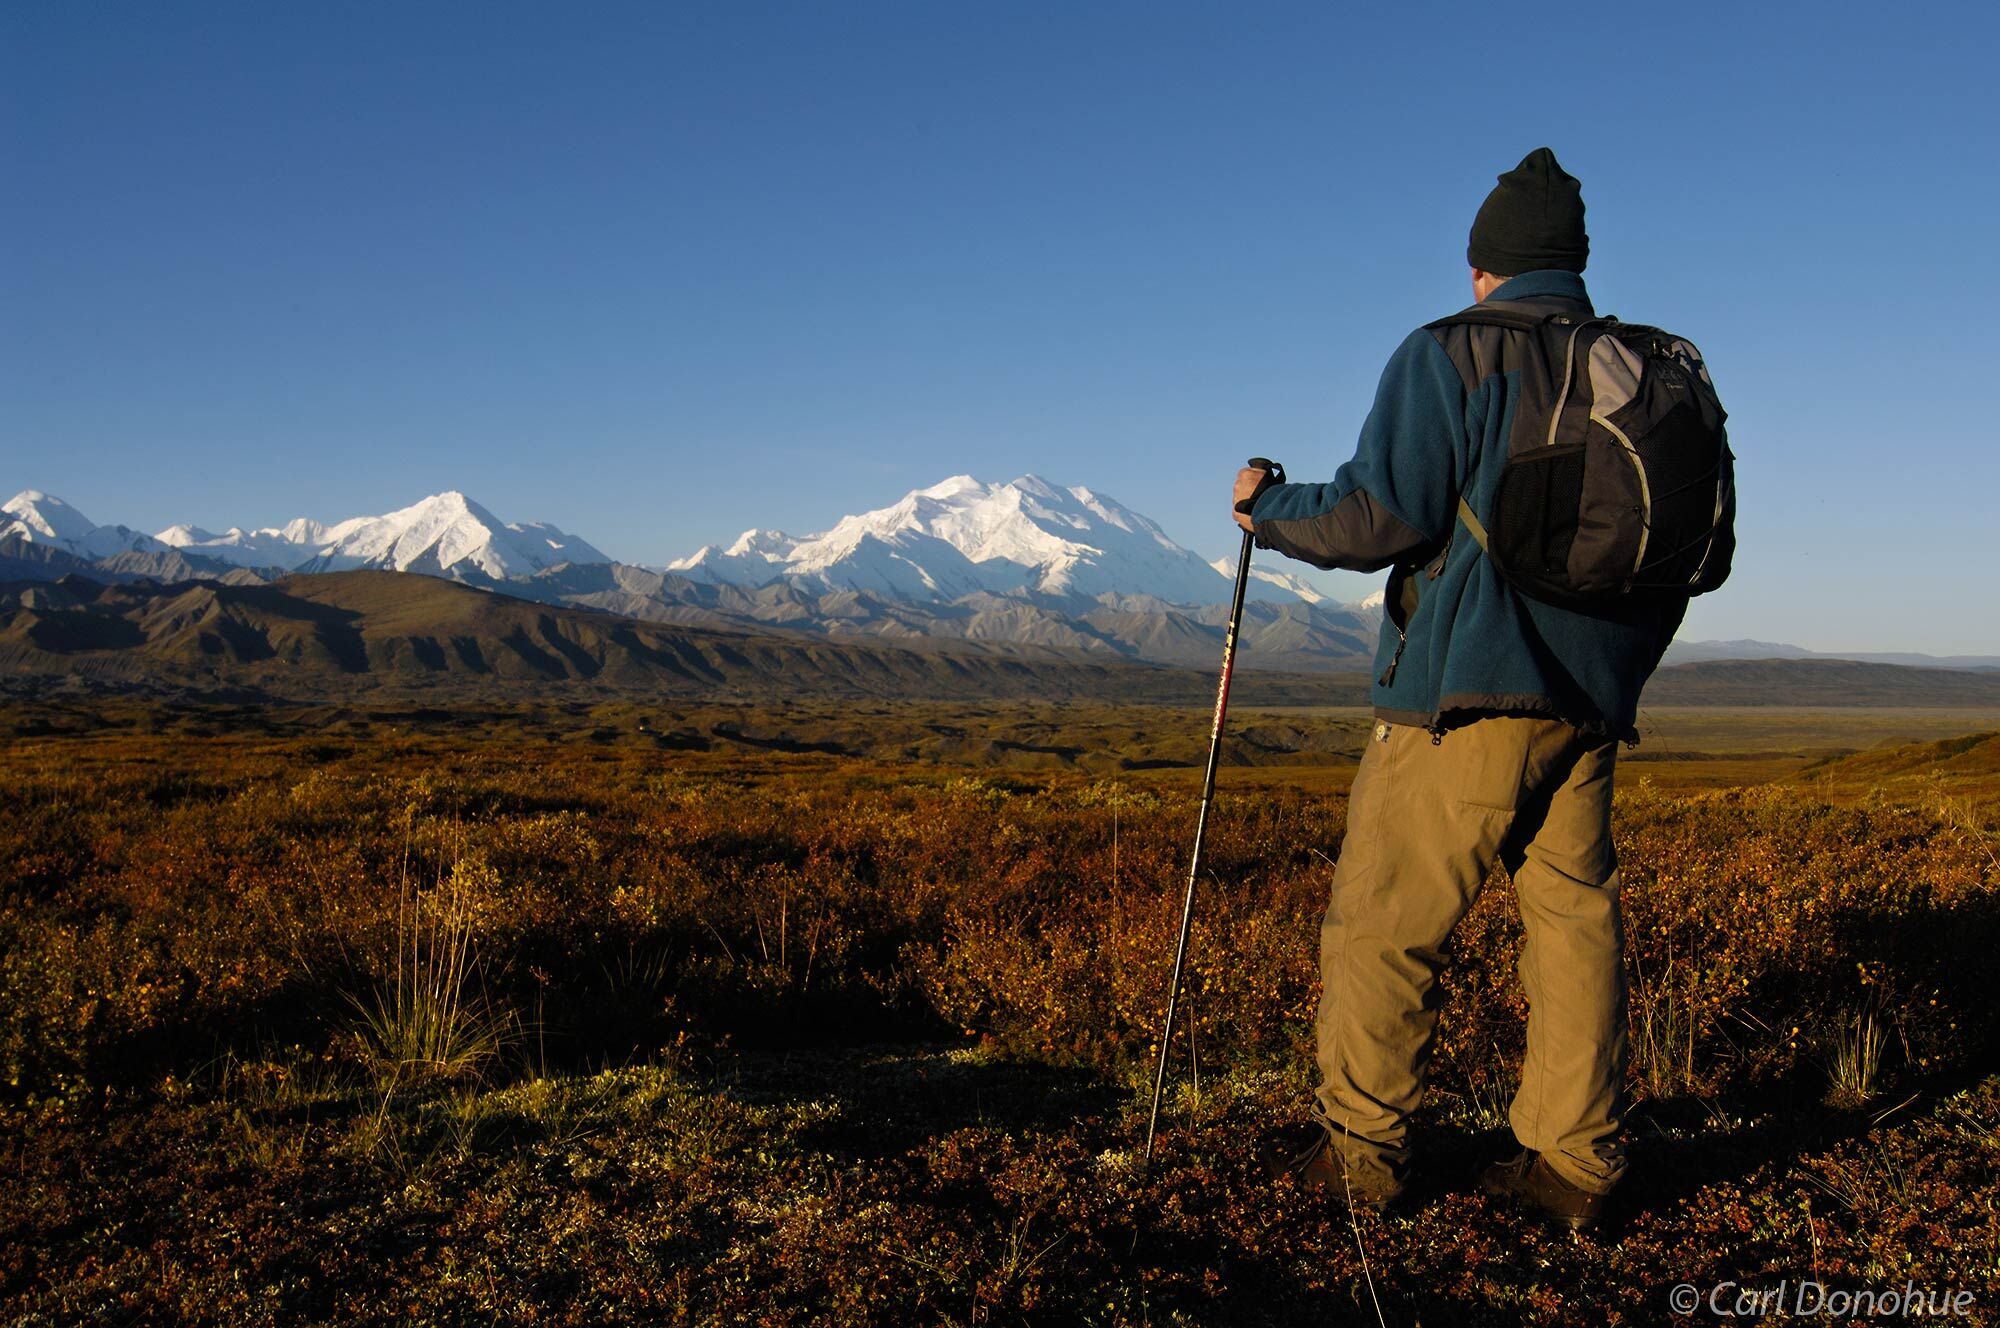 A hiker takes in the view of Mt. Denali, known locally as "Denali" , which is a native Athabascan word translating as "The Great...